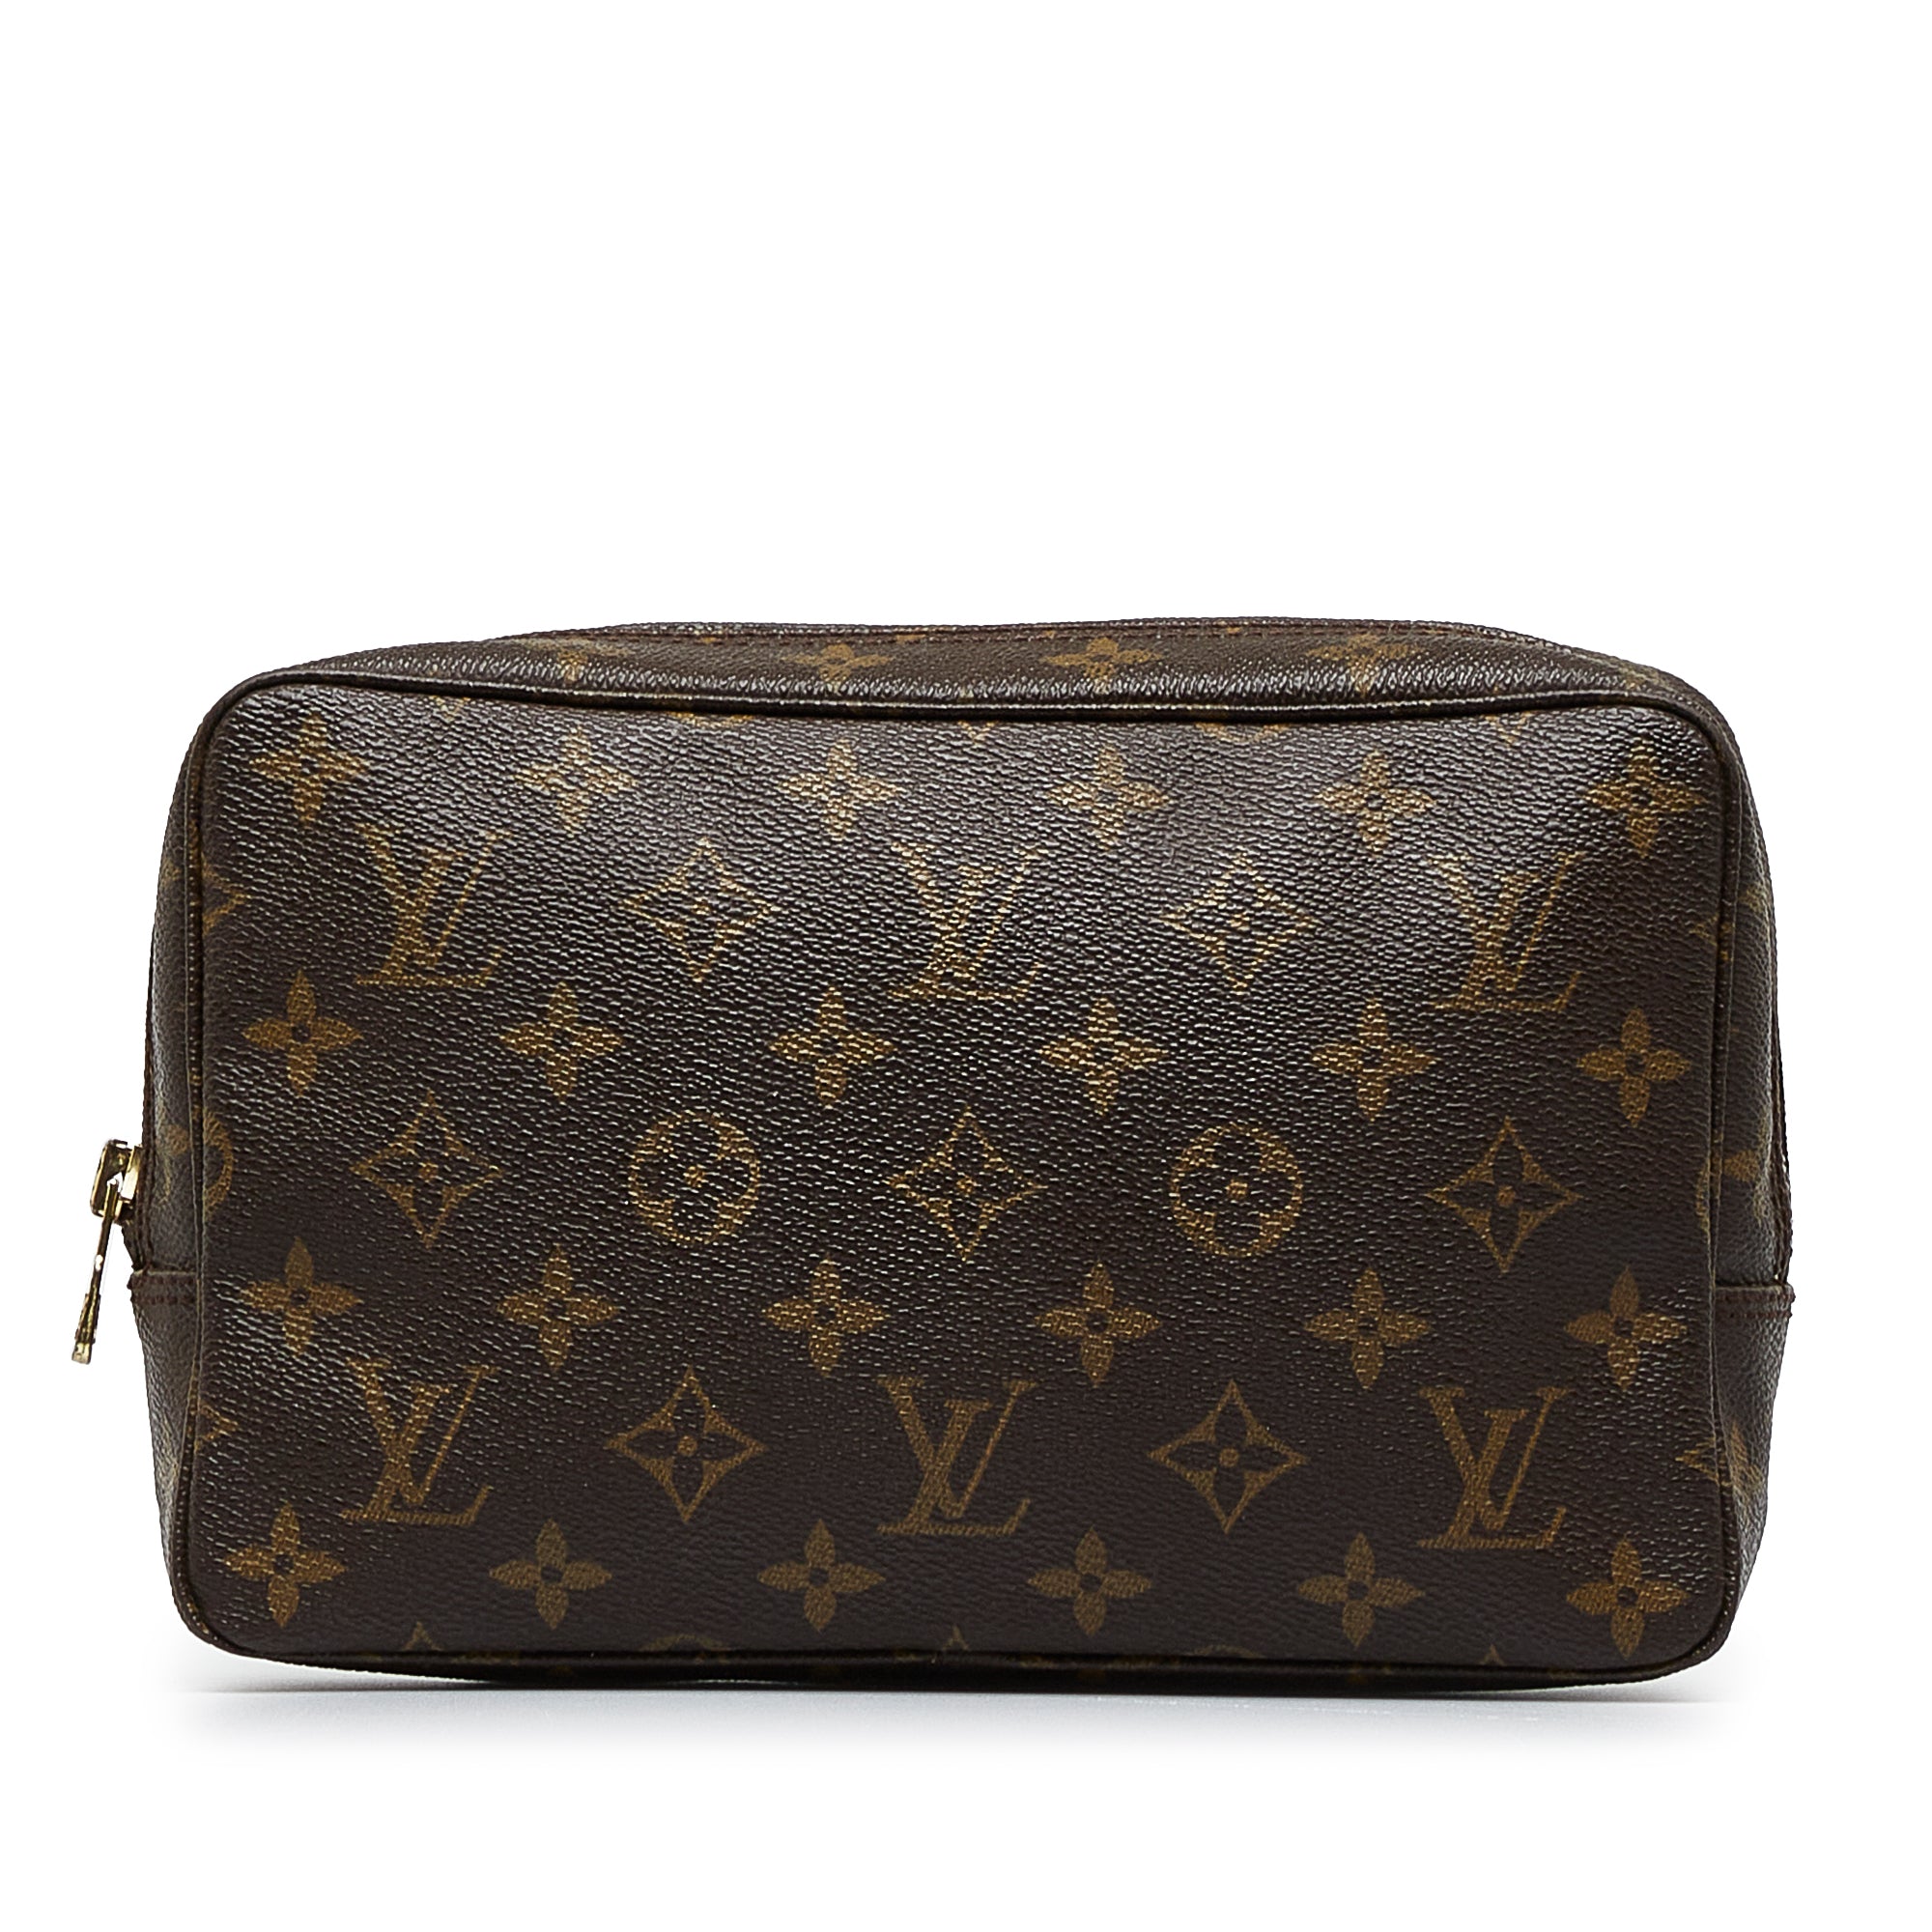 Do you know what fits inside a Louis Vuitton Trousse 28 vs. 23? A